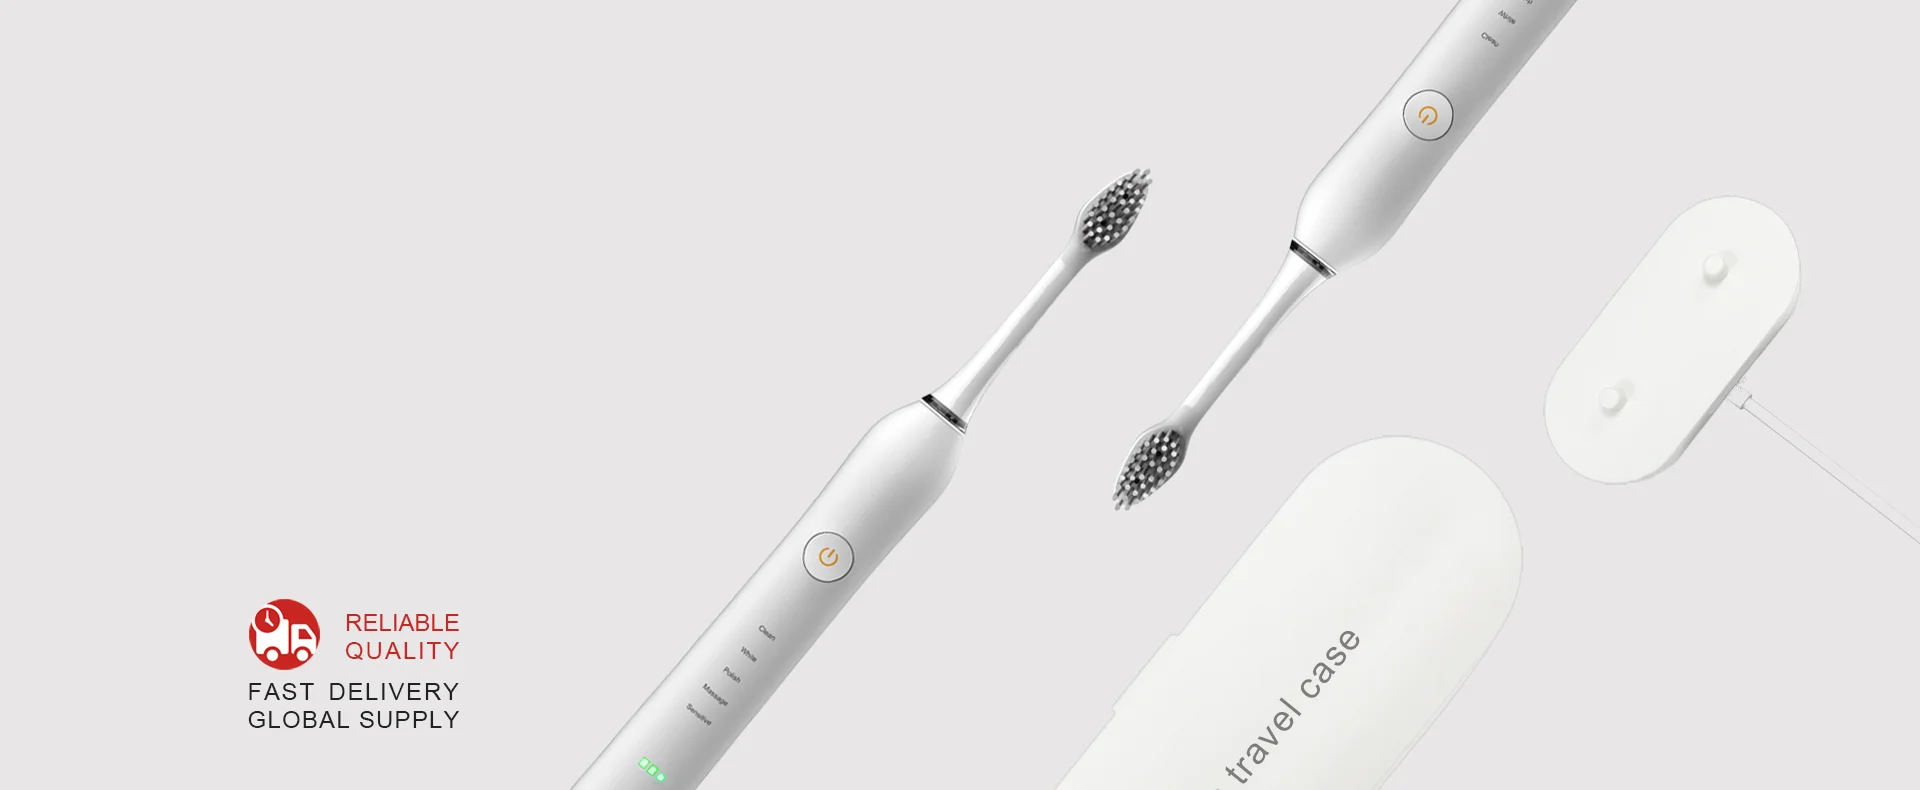 private label electric toothbrush manufacturer